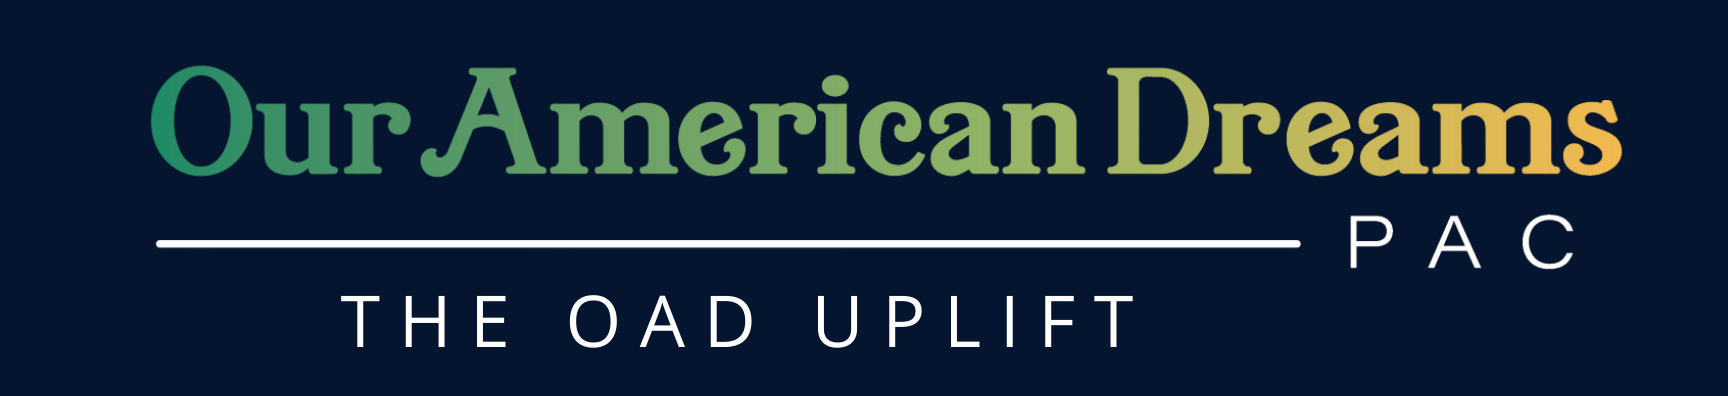 Our American Dreams PAC: The OAD Uplift